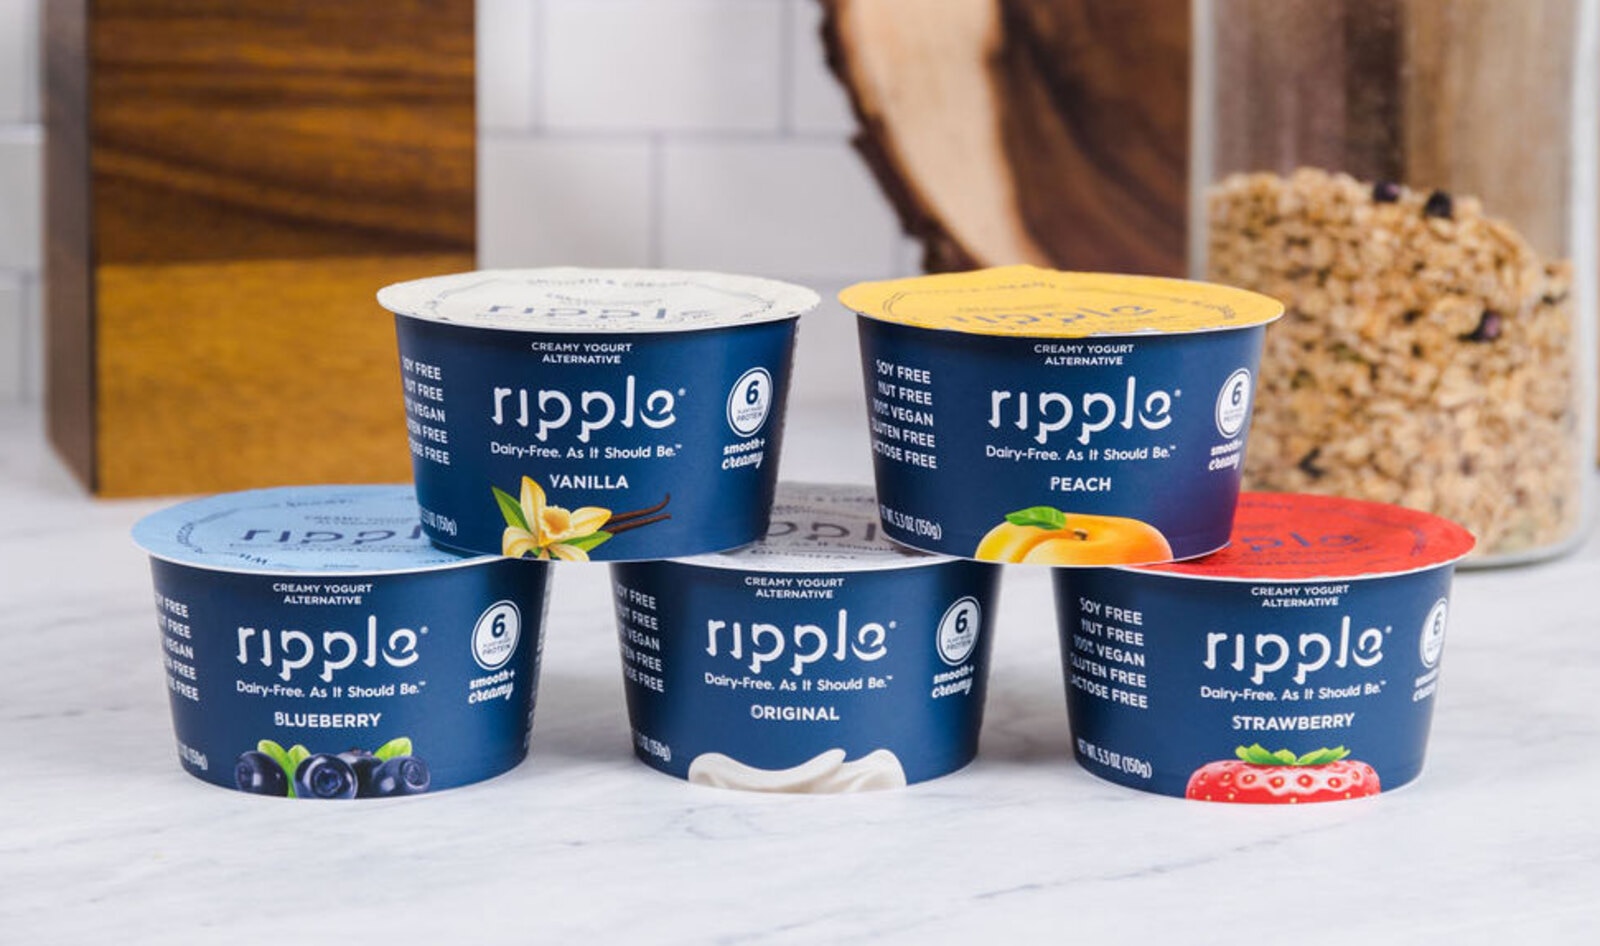 Ripple Releases New and Improved Vegan Yogurt Line at Target